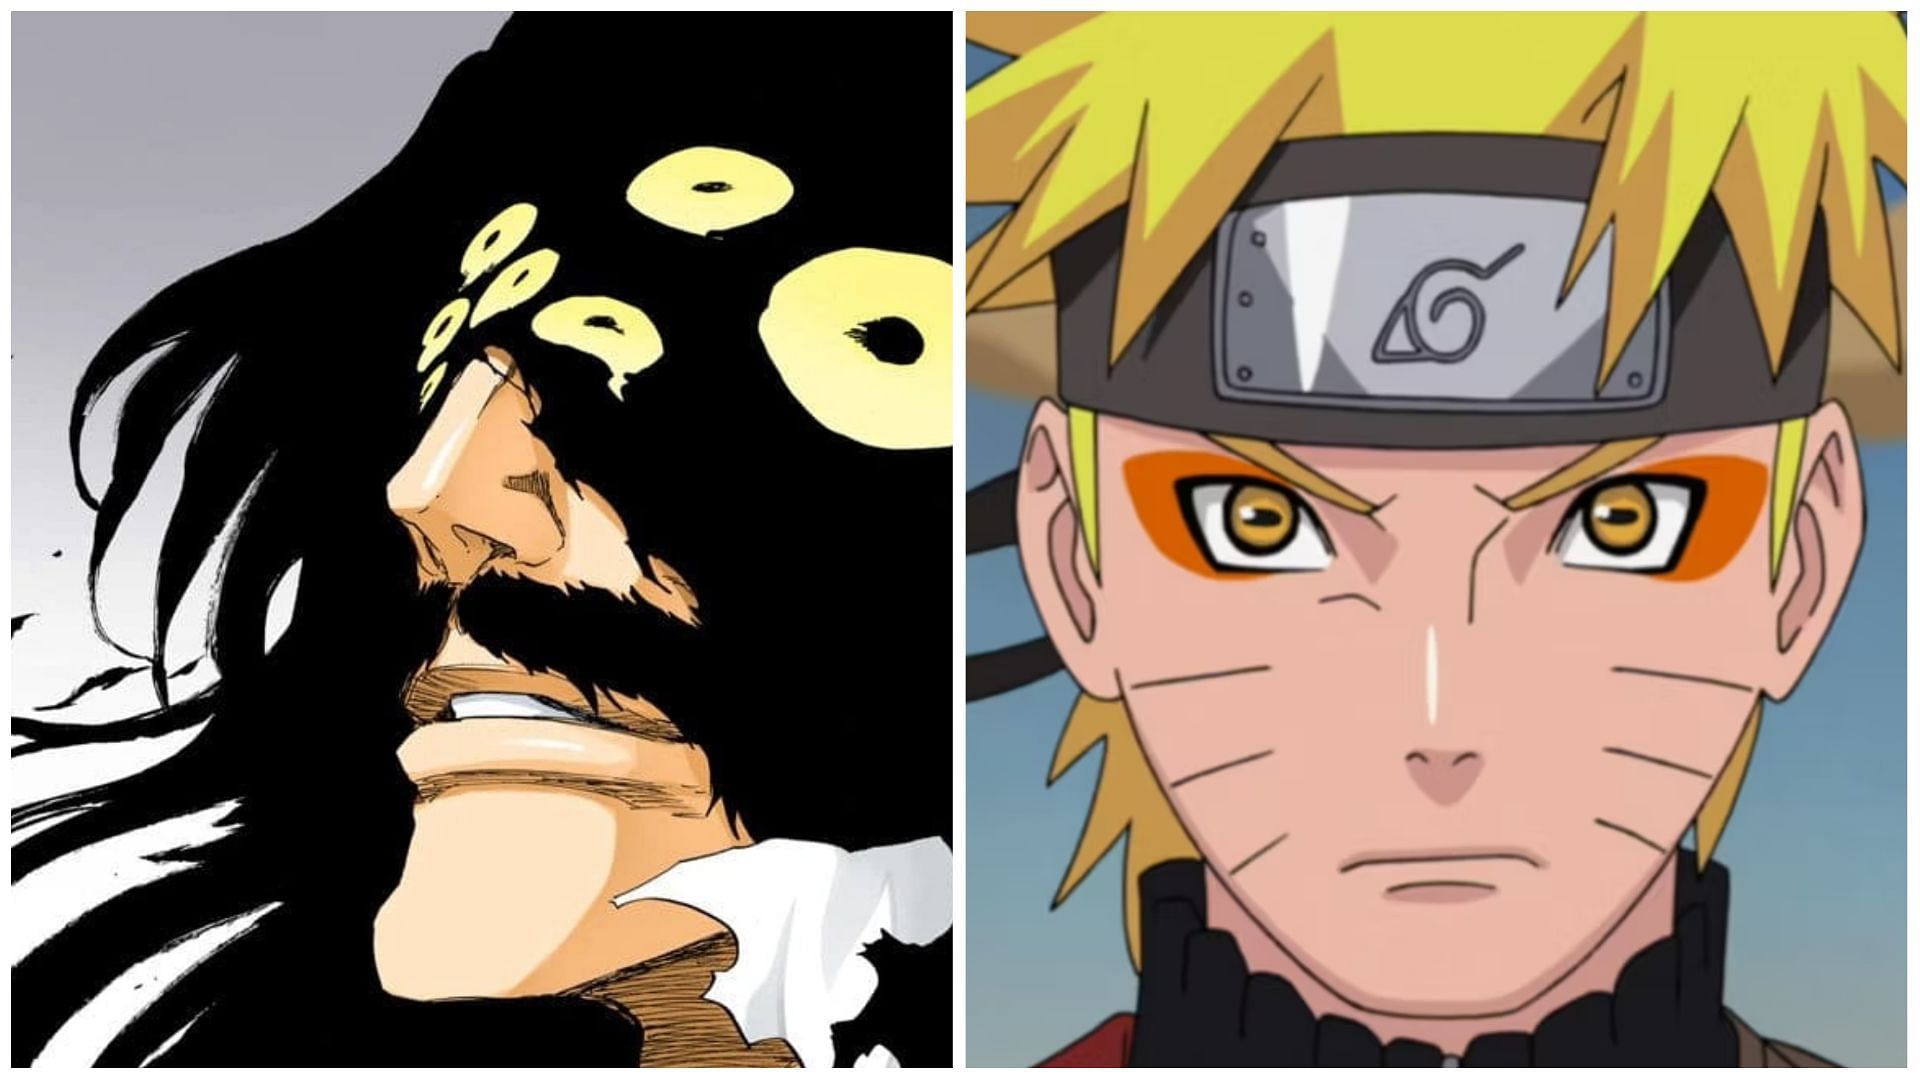 Comparing the characters from Naruto and Bleach series (Images via Pierrot, Tite Kubo)